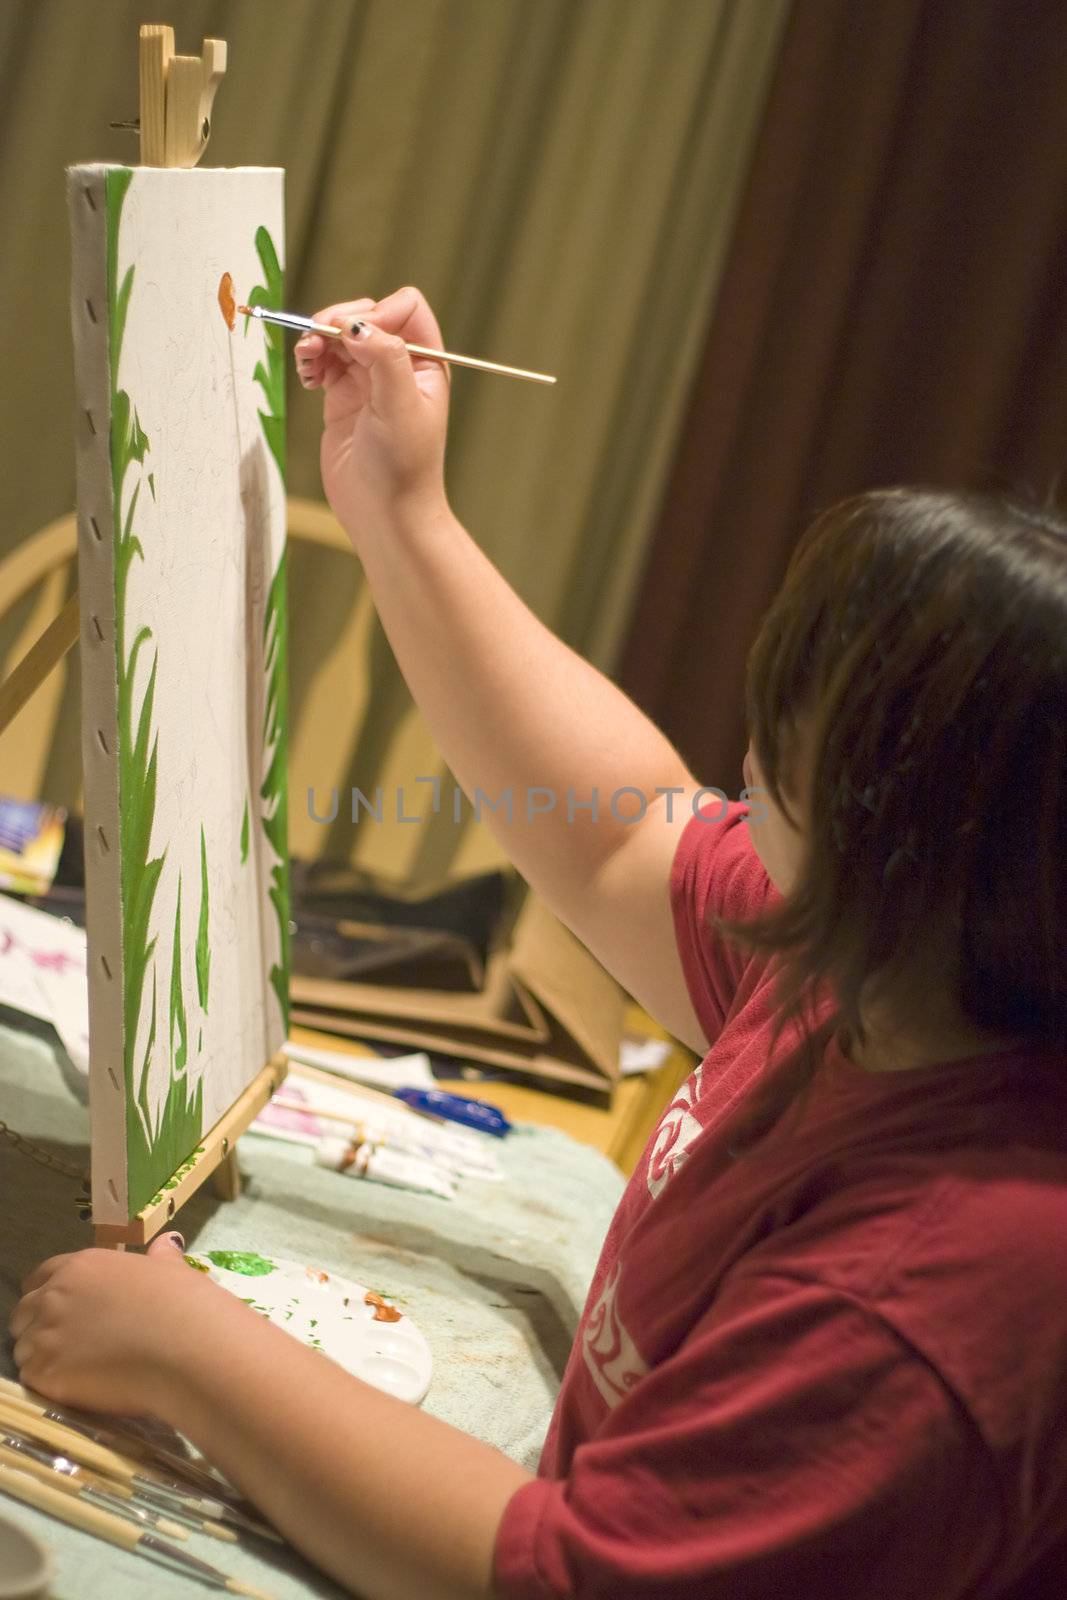 A young woman doing working with oil paints on canvas.